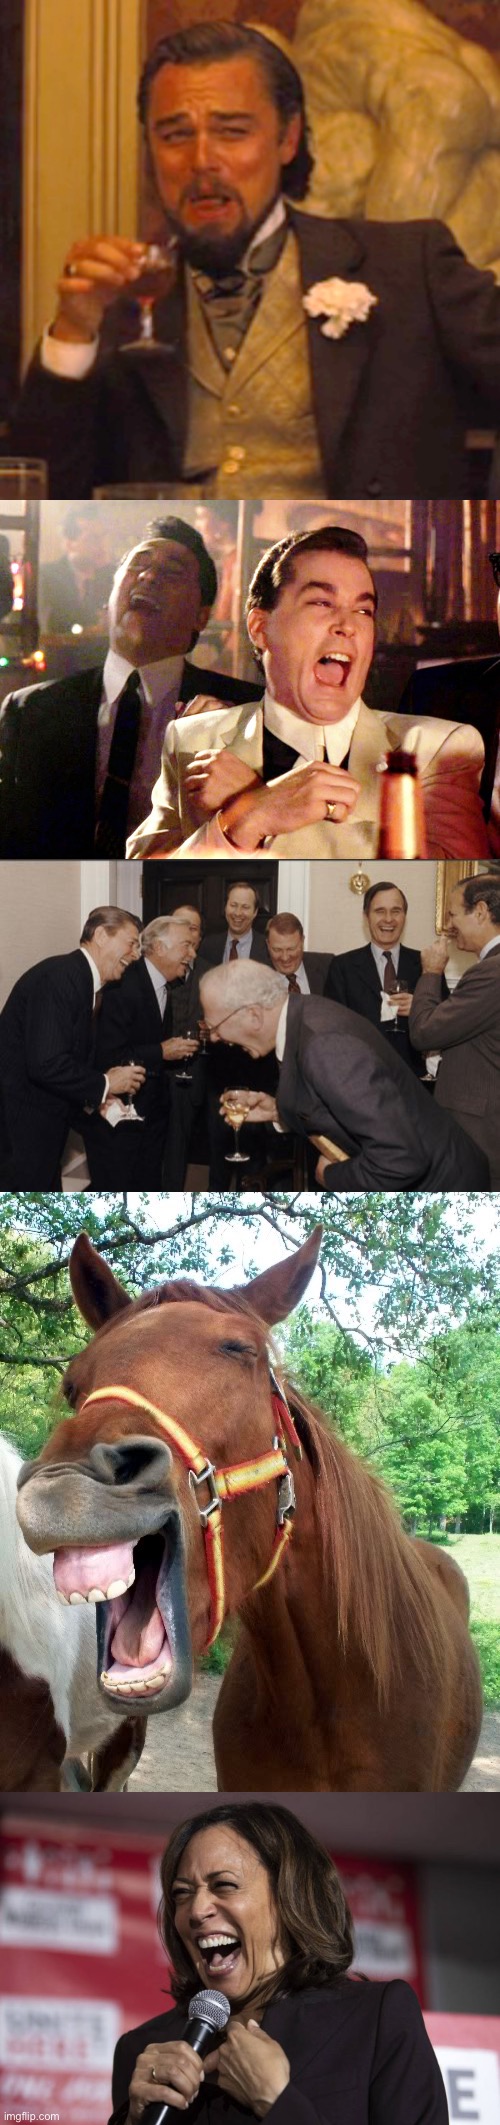 image tagged in memes,laughing leo,good fellas hilarious,laughing men in suits,laughing horse,kamala laughing | made w/ Imgflip meme maker